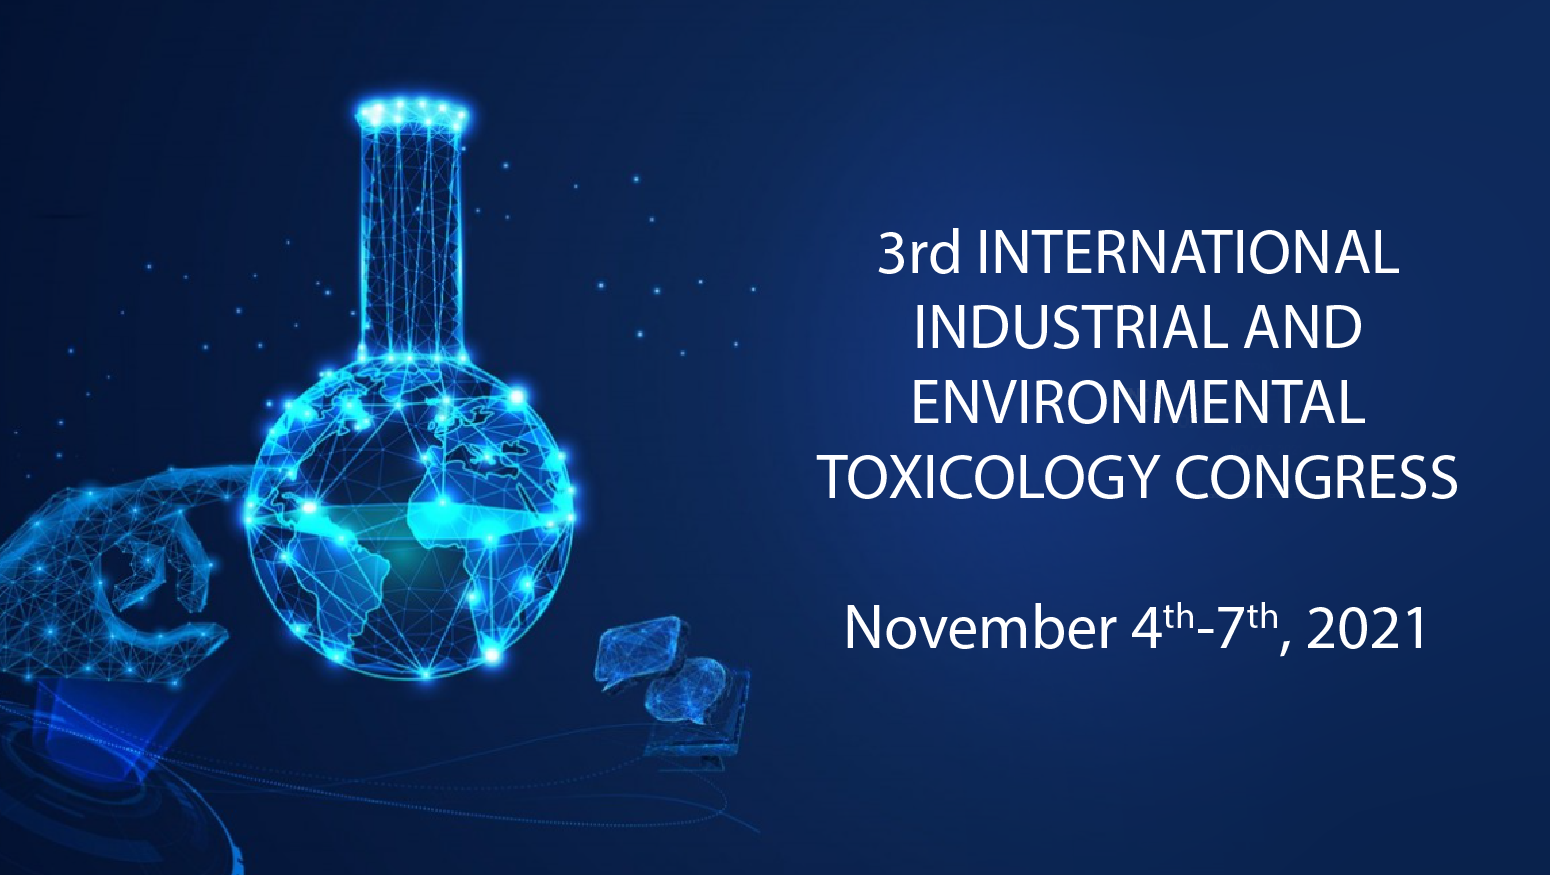 3rd International Industrial and Environmental Toxicology Congress